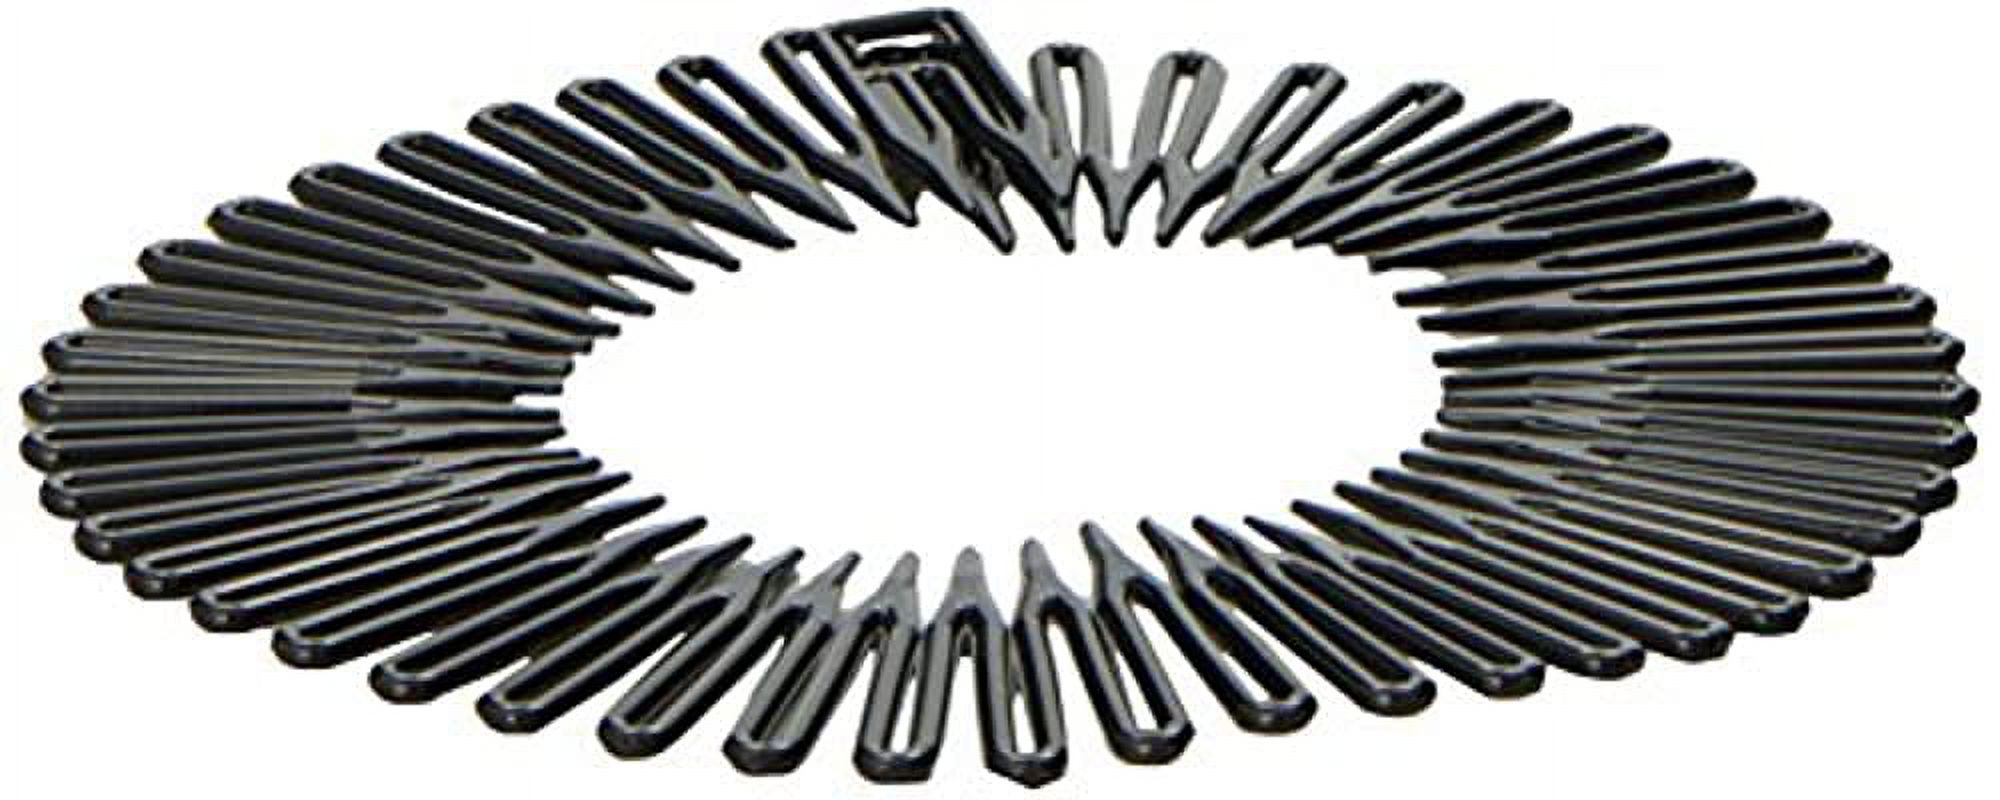 Caravan Full Circle Spring Head Band Comb in Classic Black with Deep Teeth and Closure, Ponytail Holders & Scrunchies - image 3 of 4